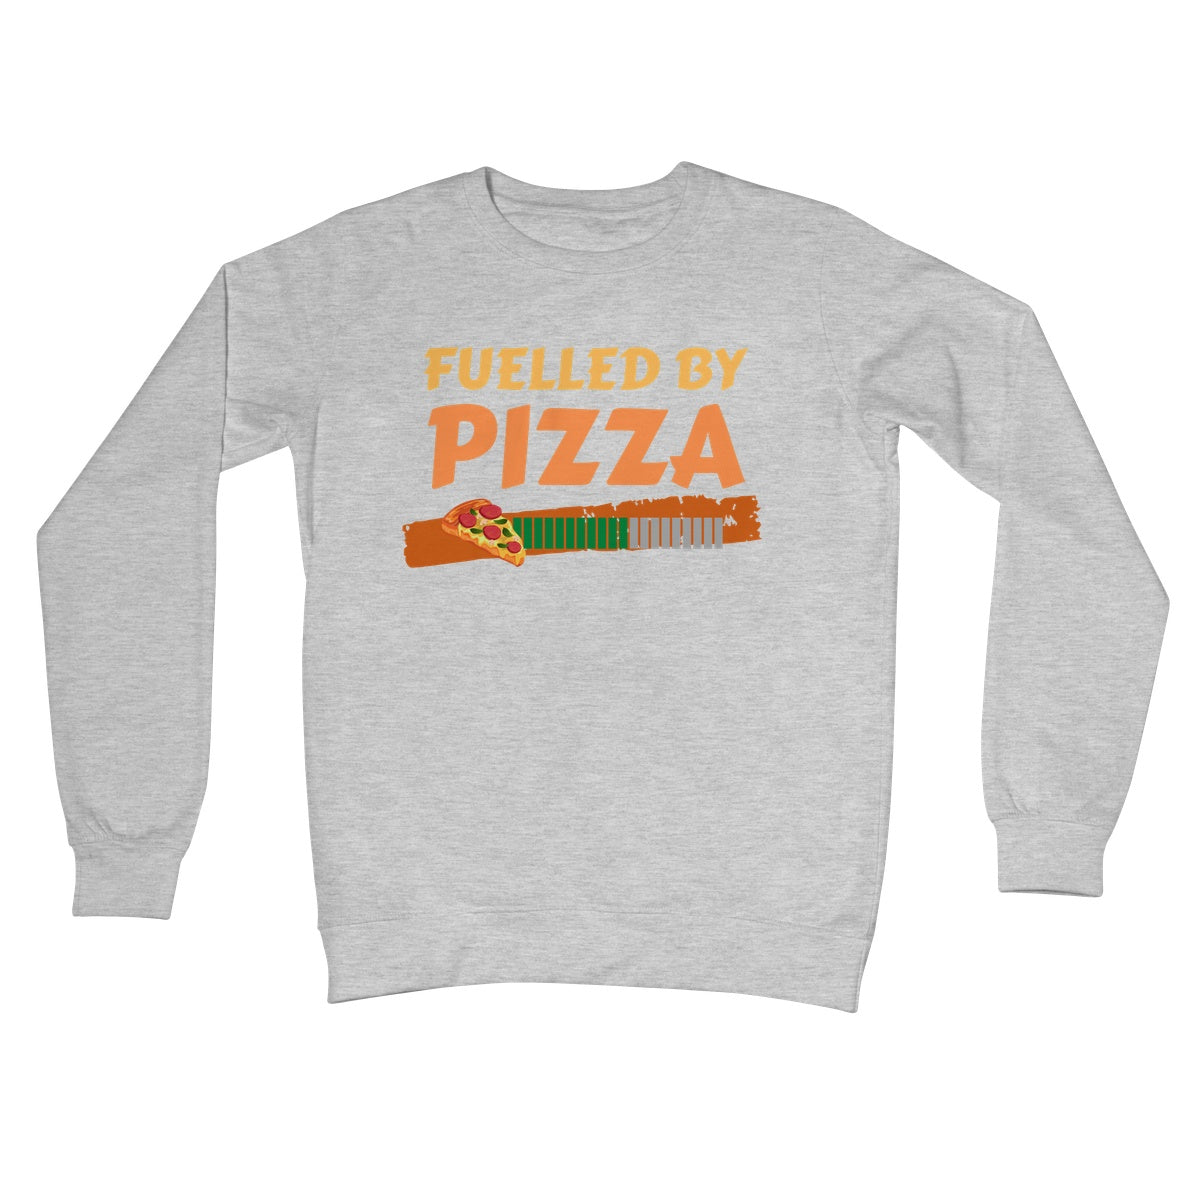 fuelled by pizza jumper grey